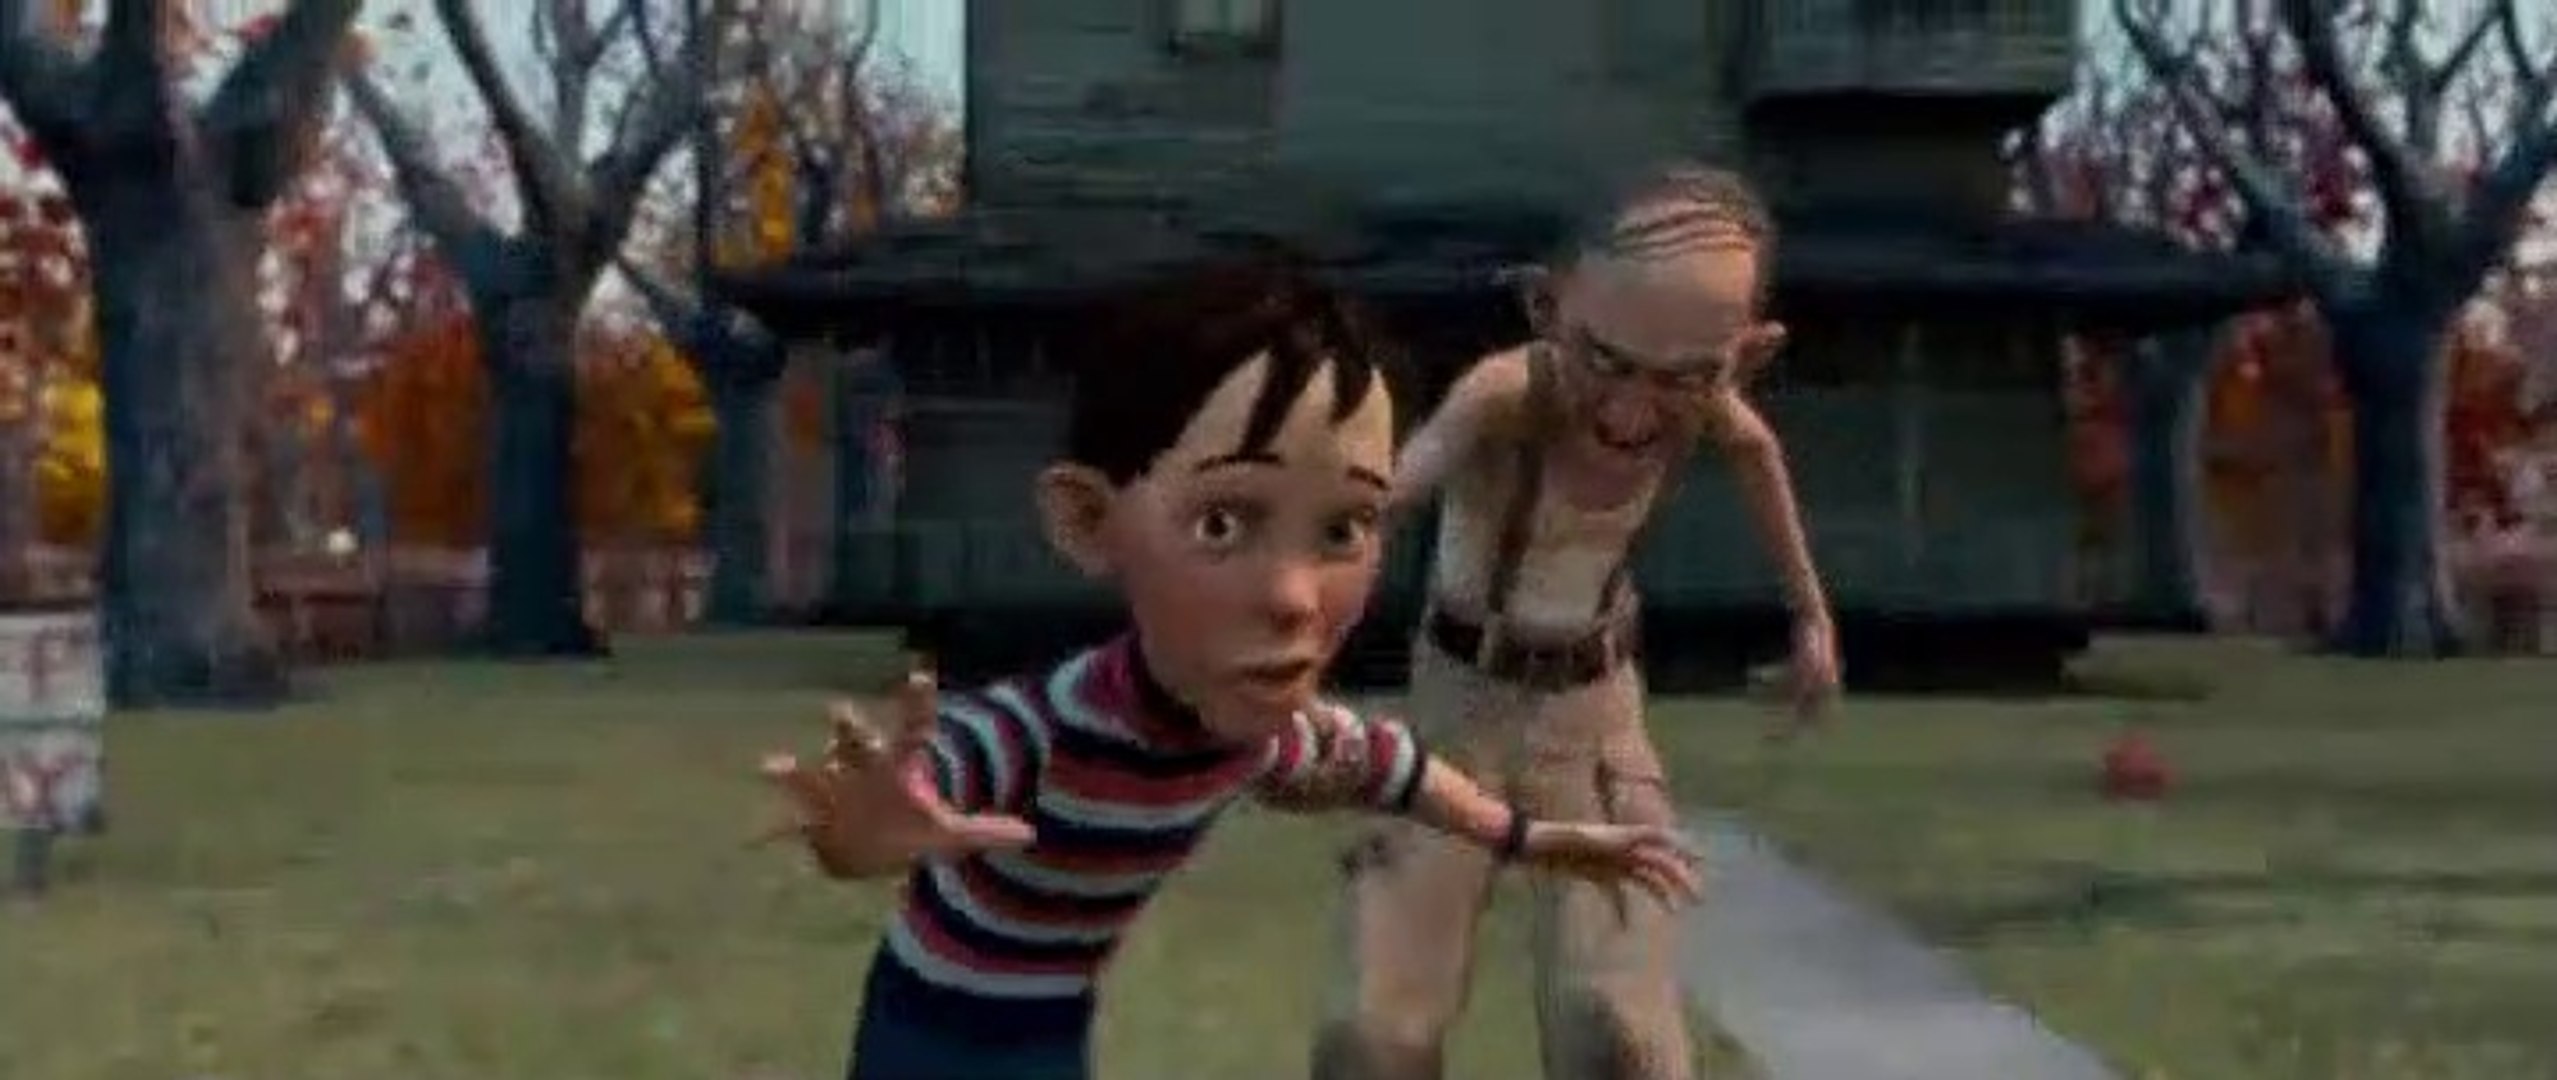 Monster House Full Hindi Dubbed Animated Movie - Monster House in Hindi -  video Dailymotion